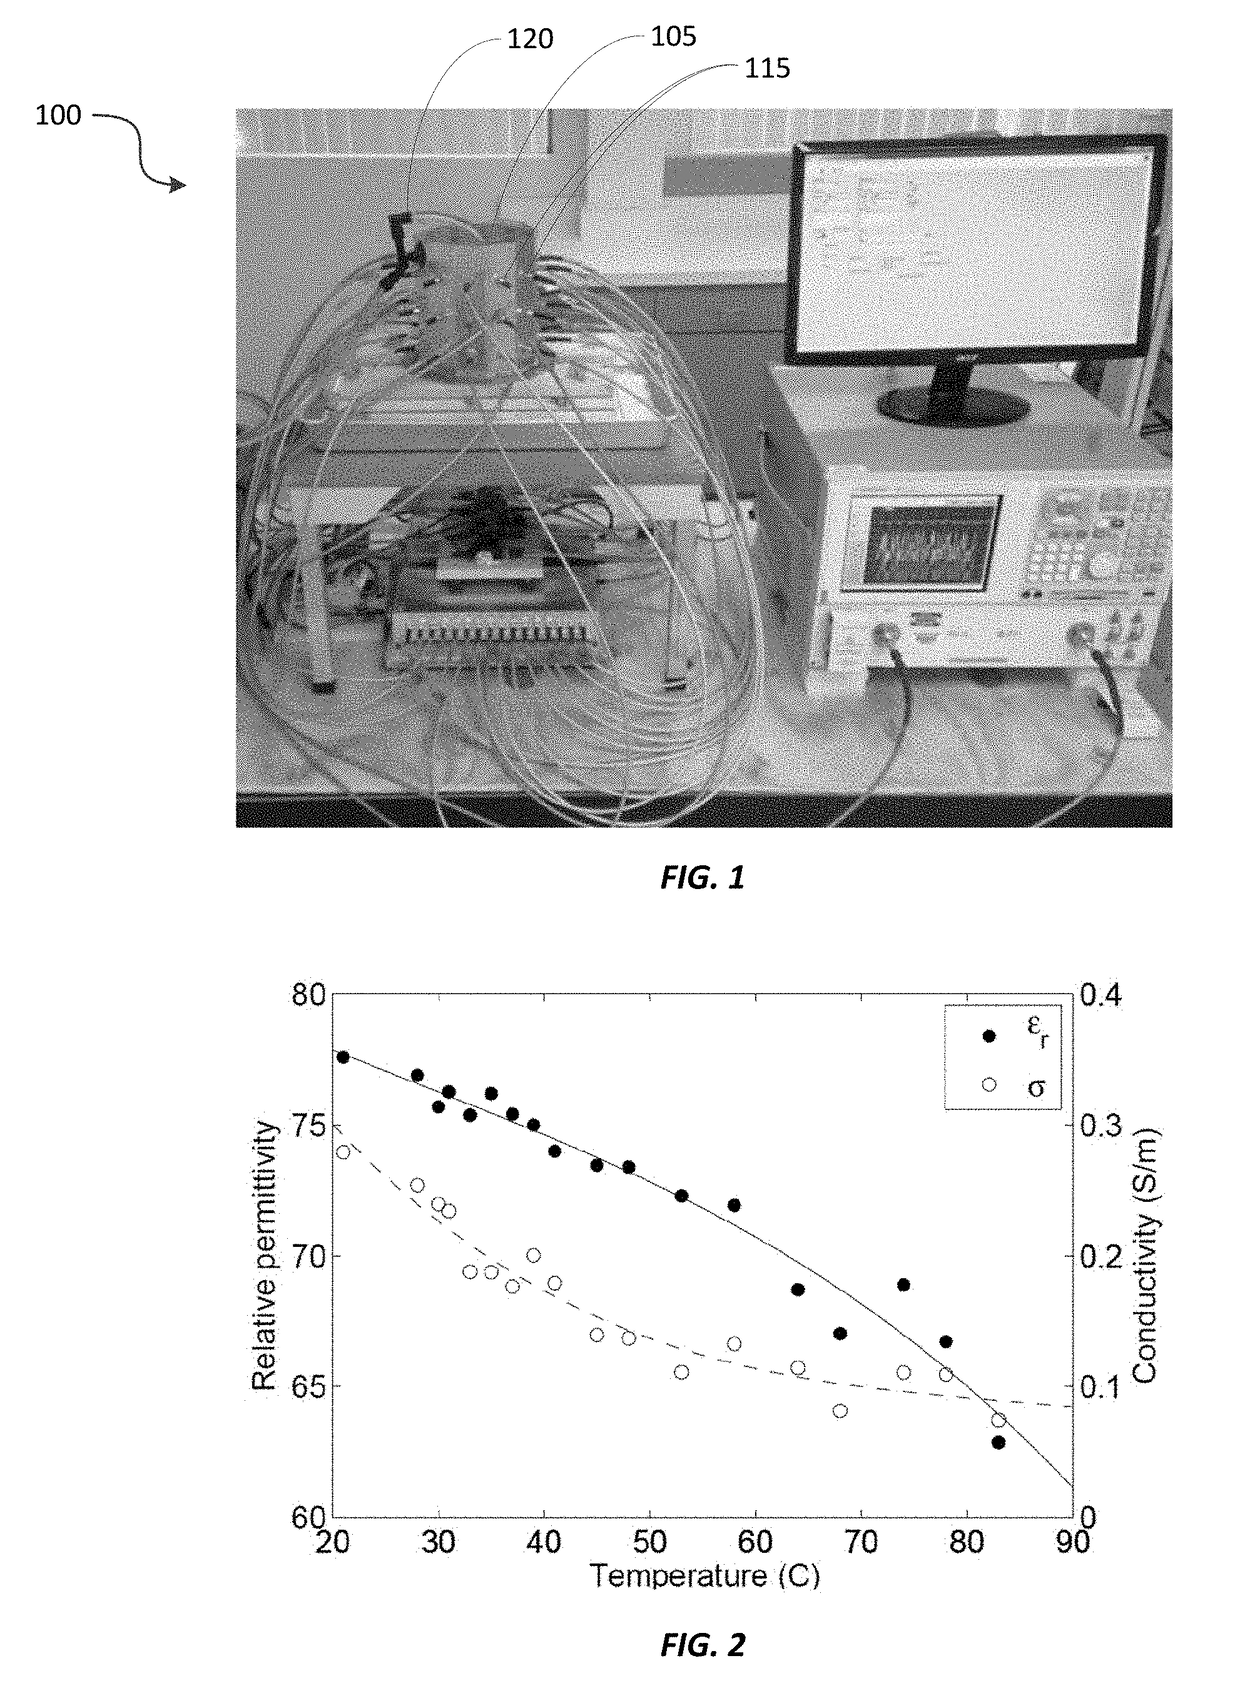 Real-time imaging system for monitoring and control of thermal therapy treatments